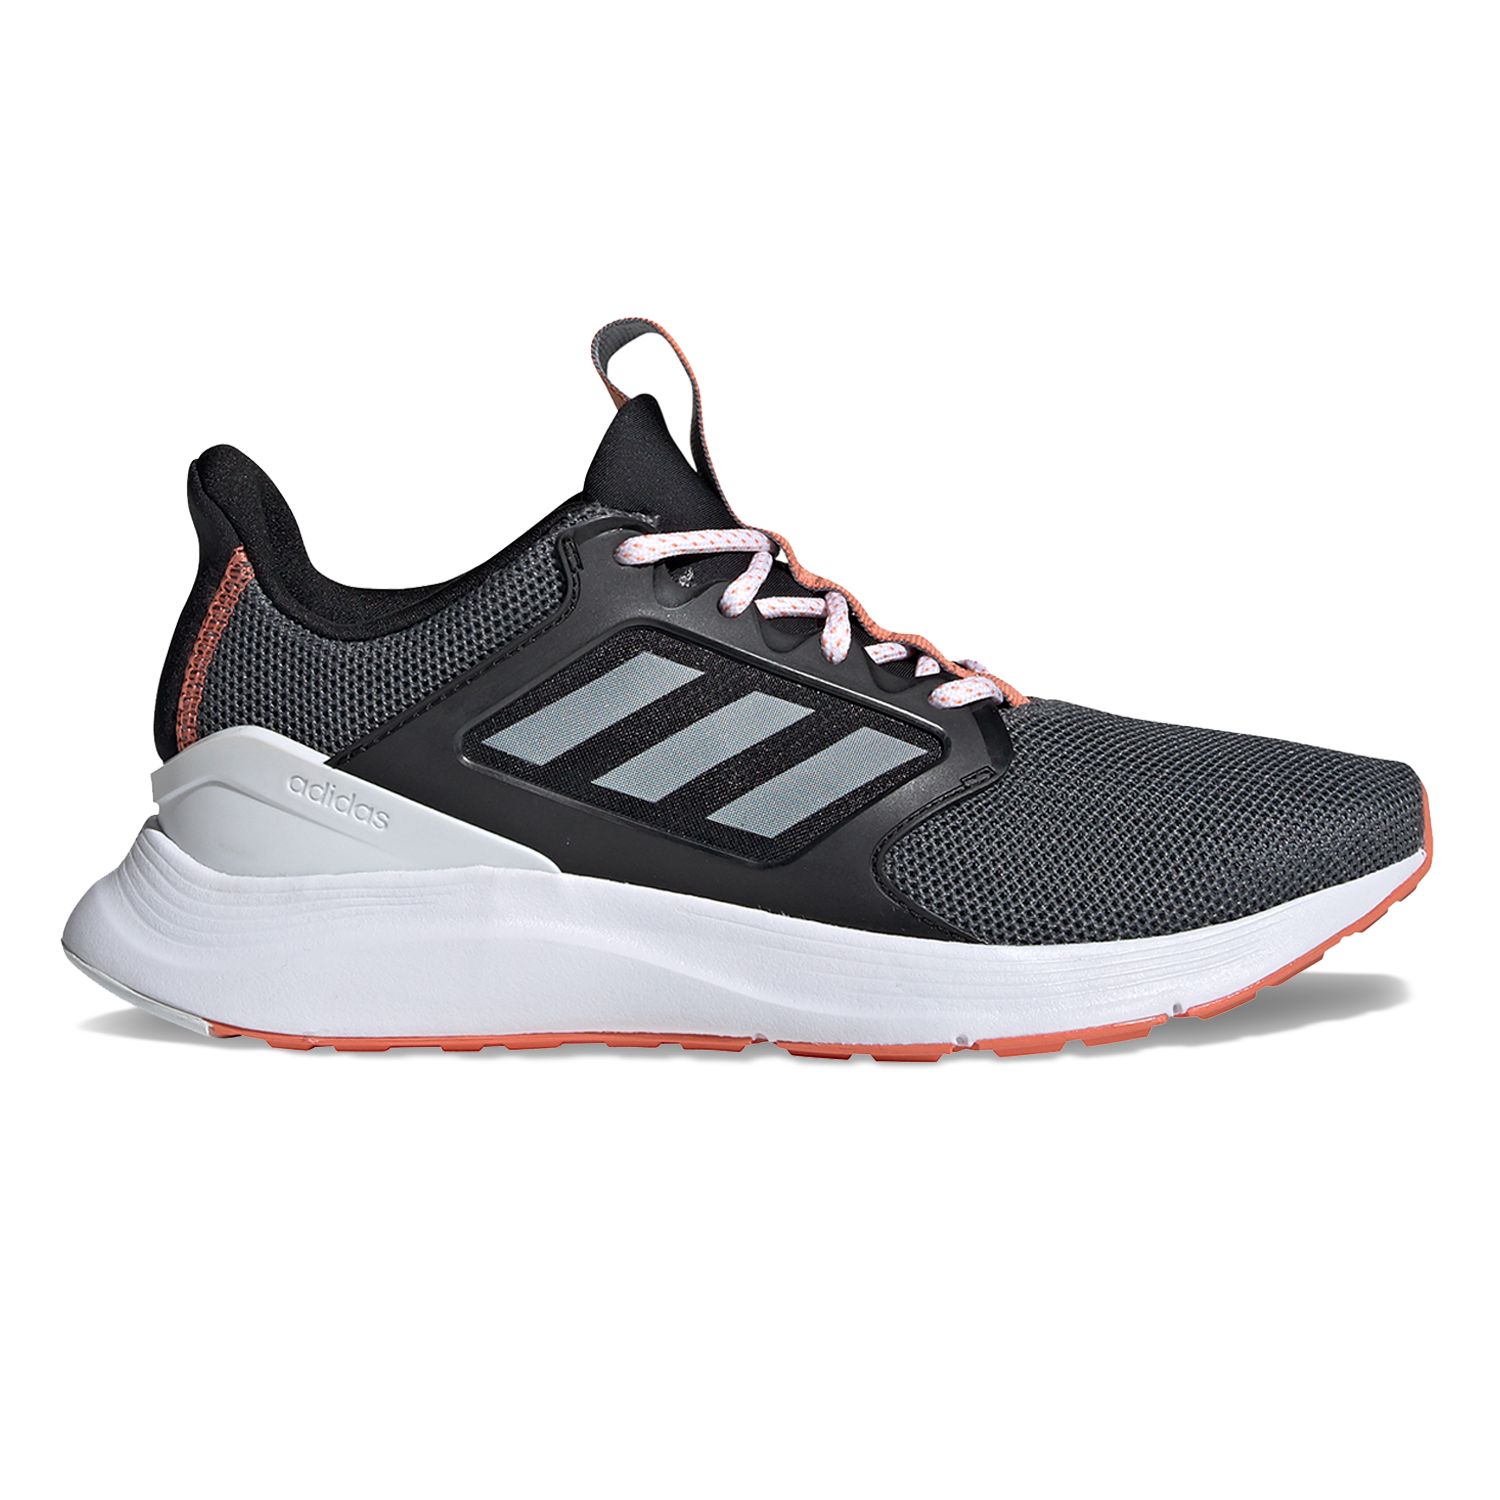 adidas energy falcon x women's running shoes review